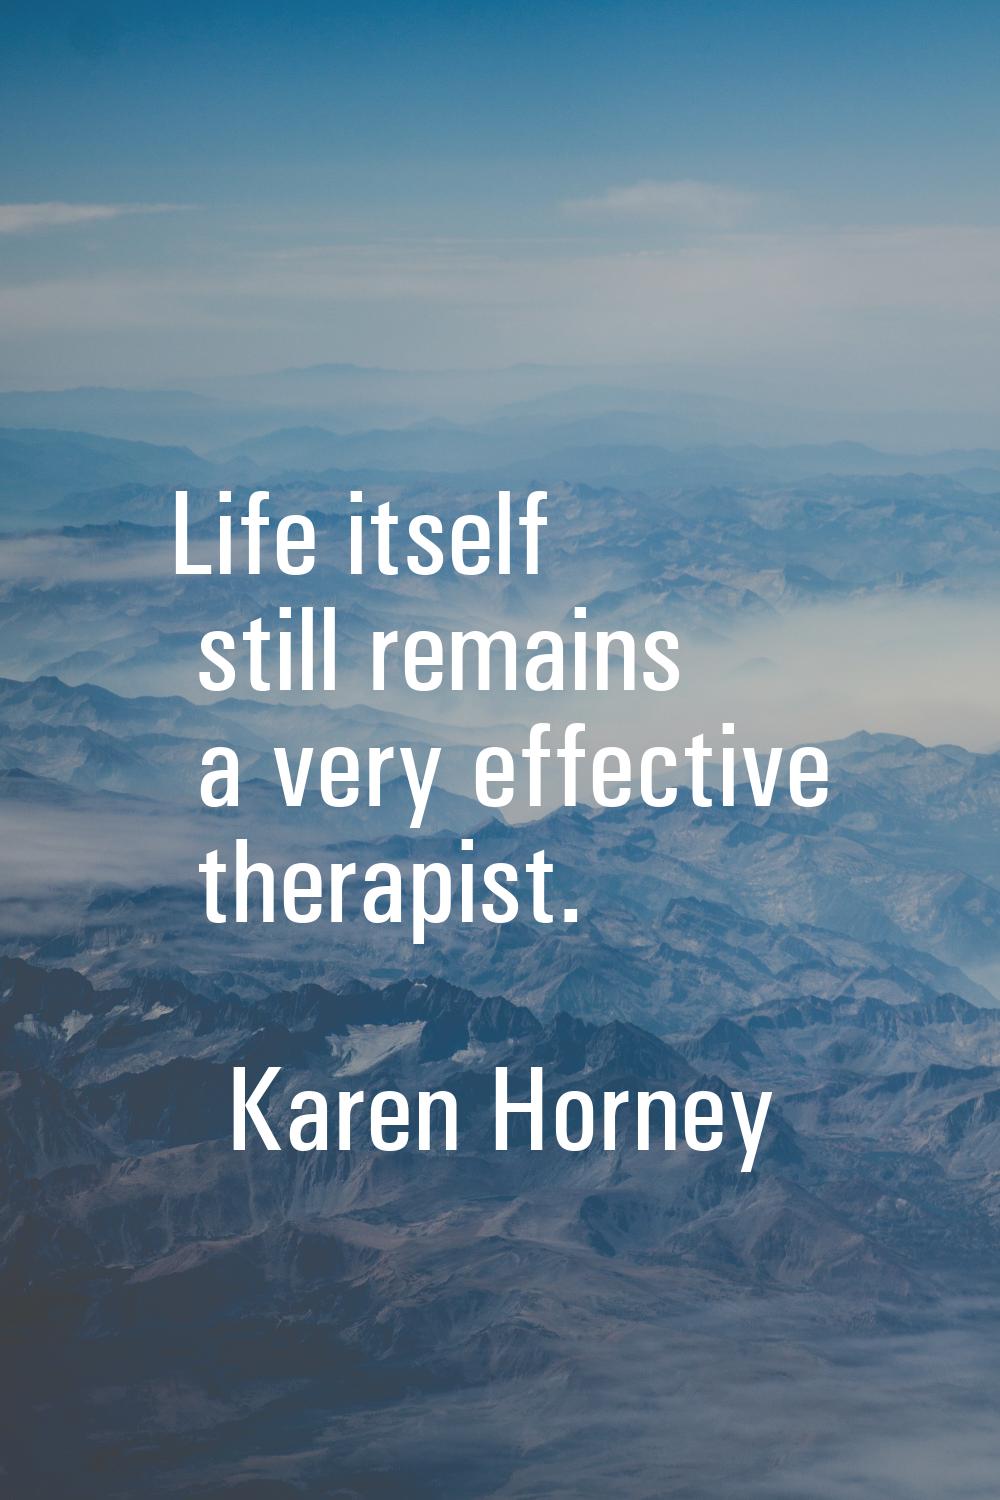 Life itself still remains a very effective therapist.